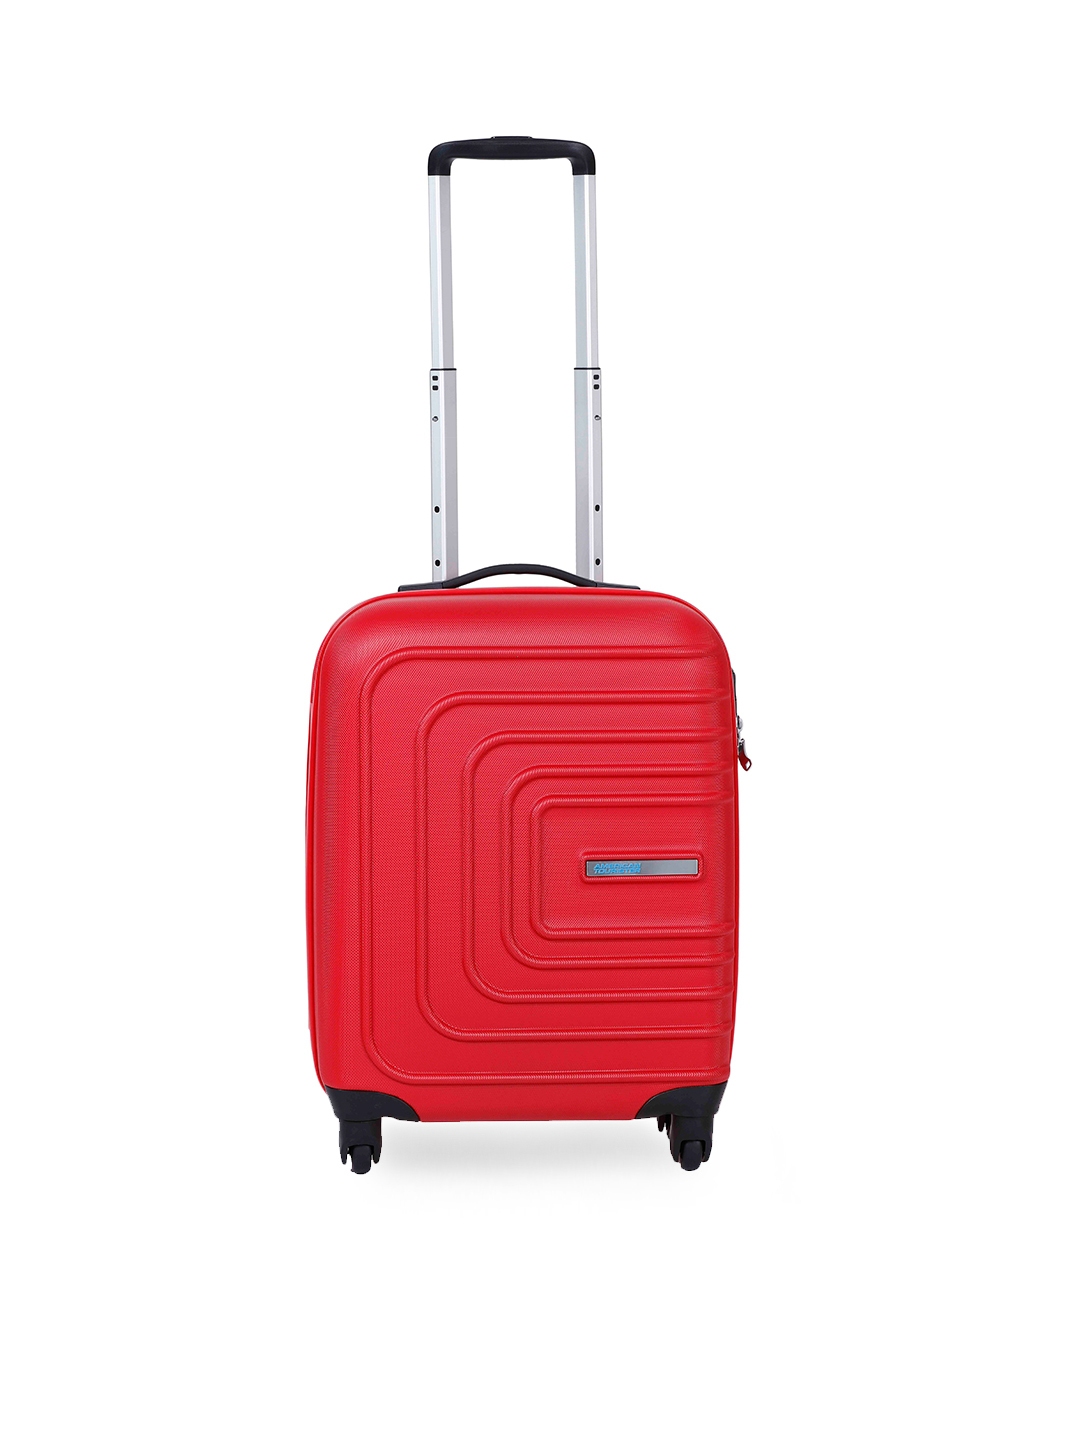 11482402308629 AMERICAN TOURISTERUnisex Red Small Trolley Suitcase 6041482402308297 1 